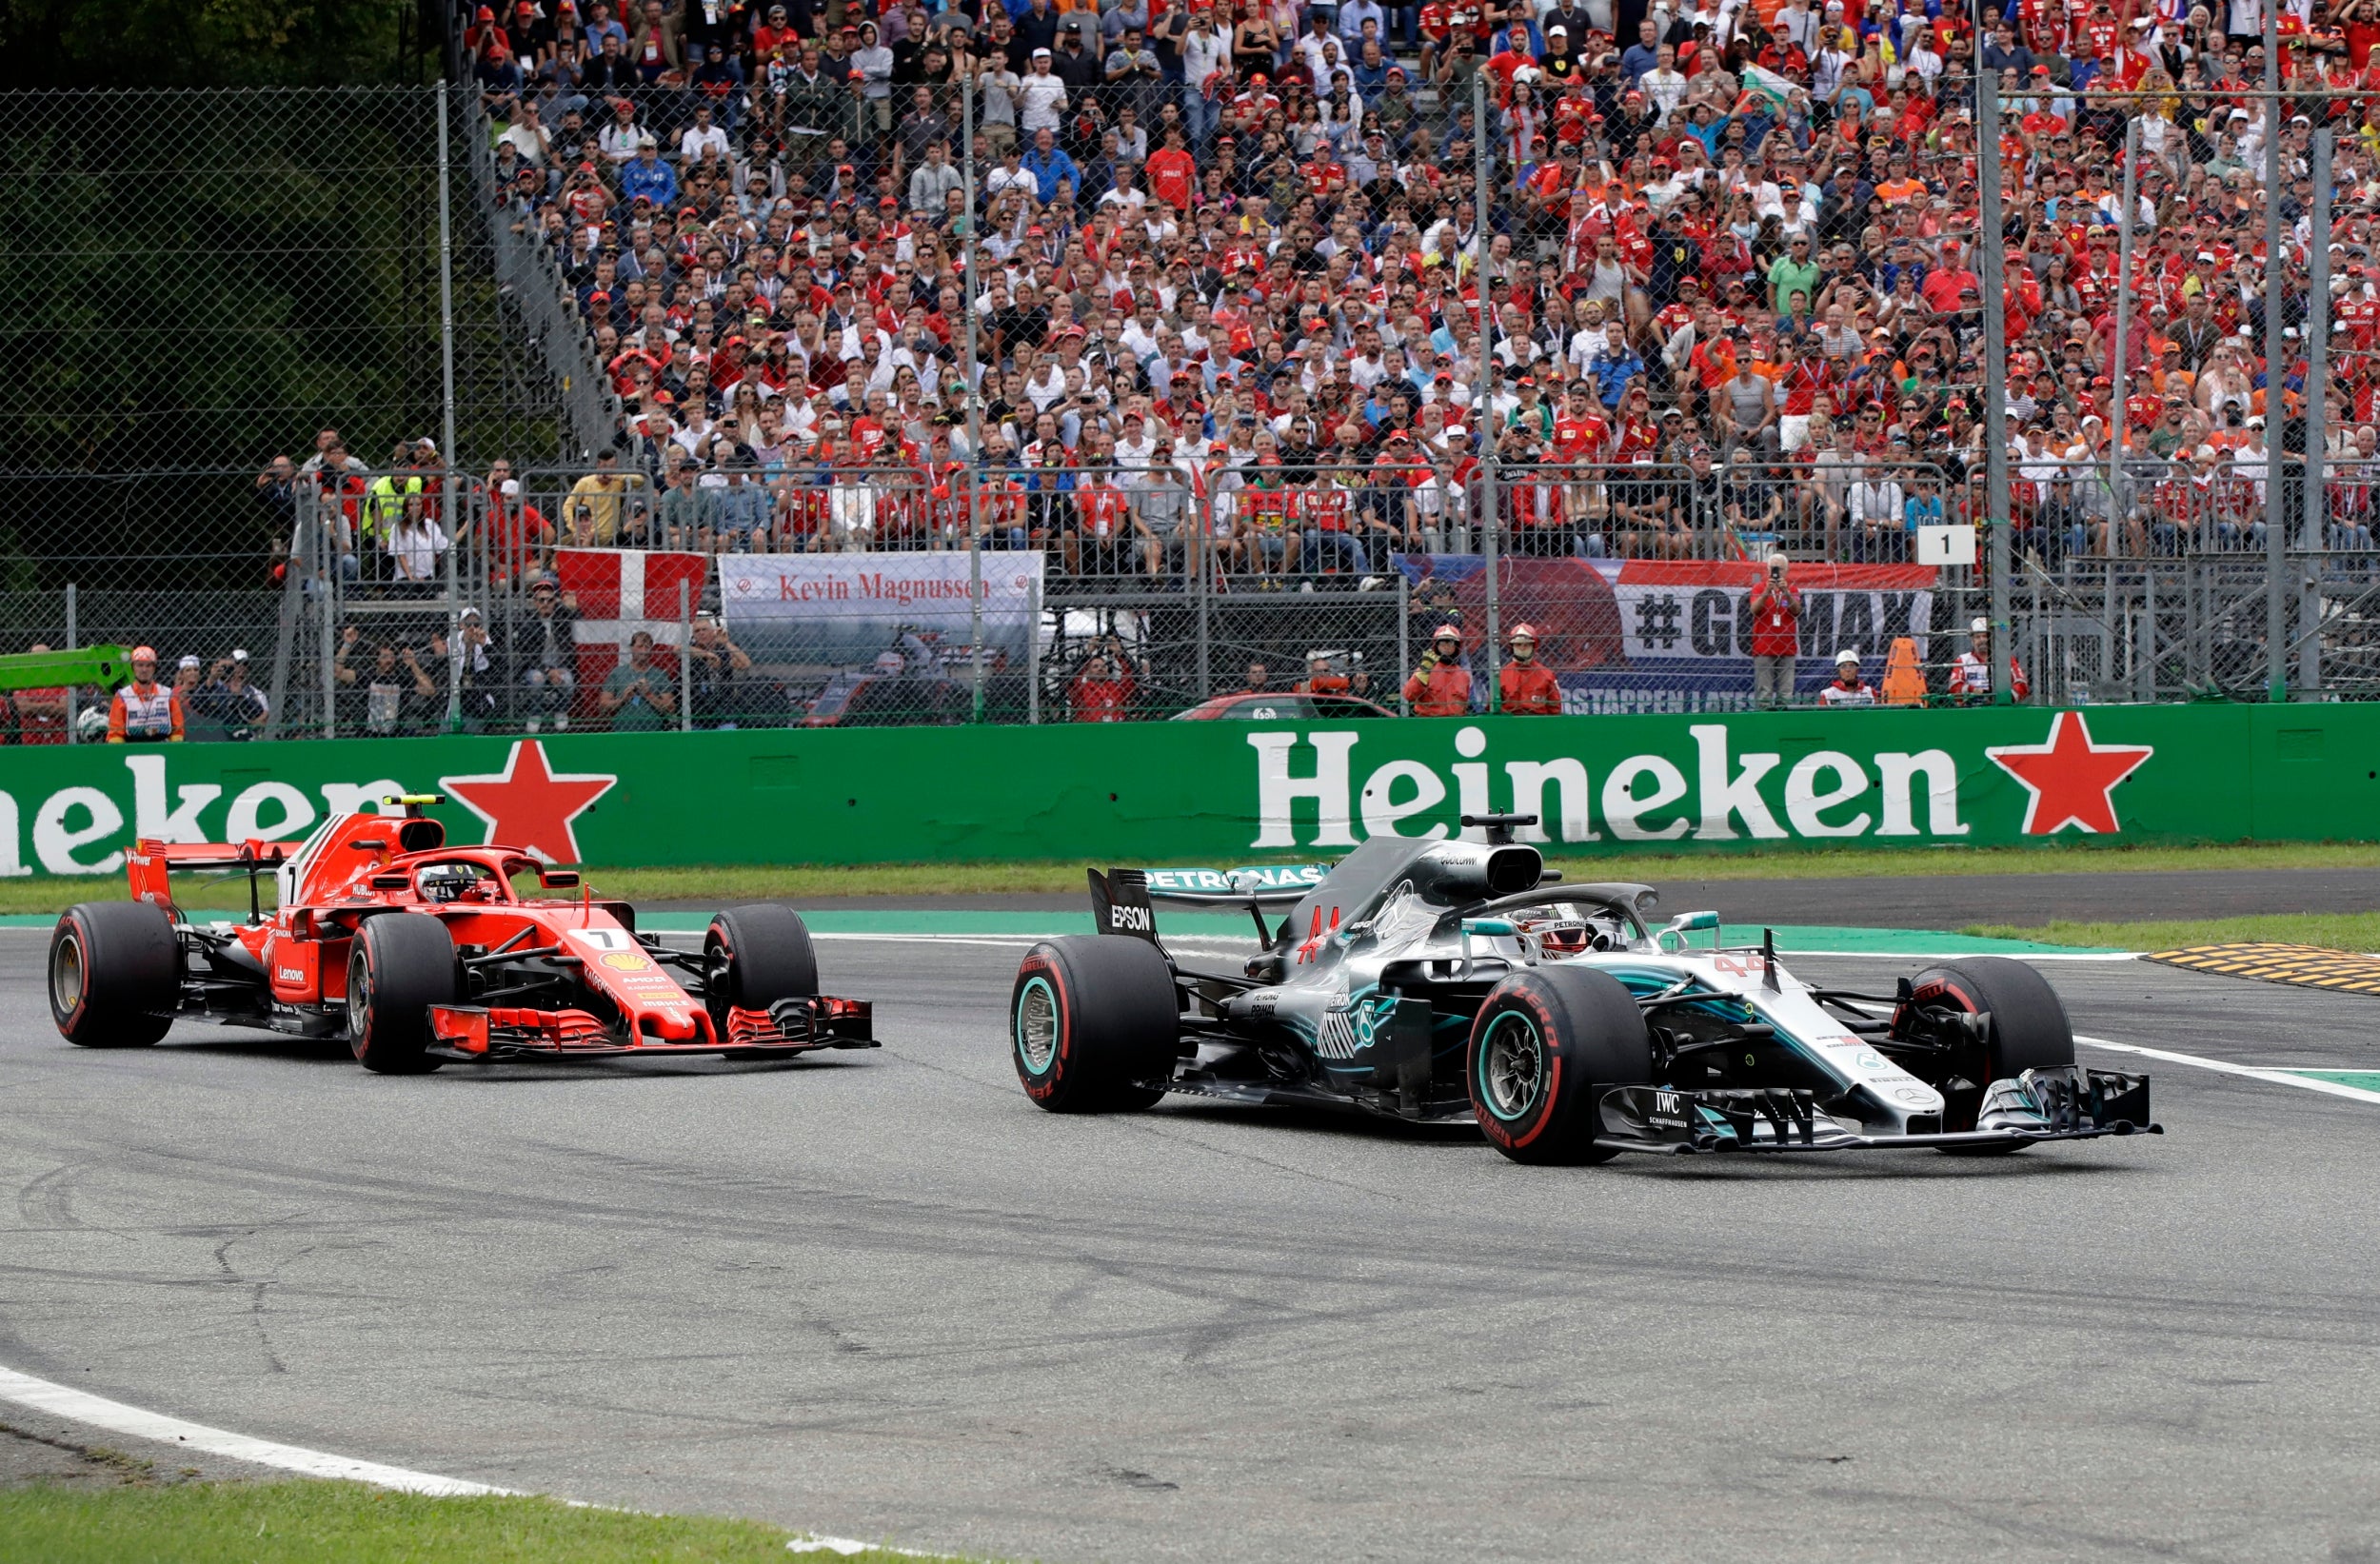 Hamilton passed Raikkonen for the victory with eight laps remaining